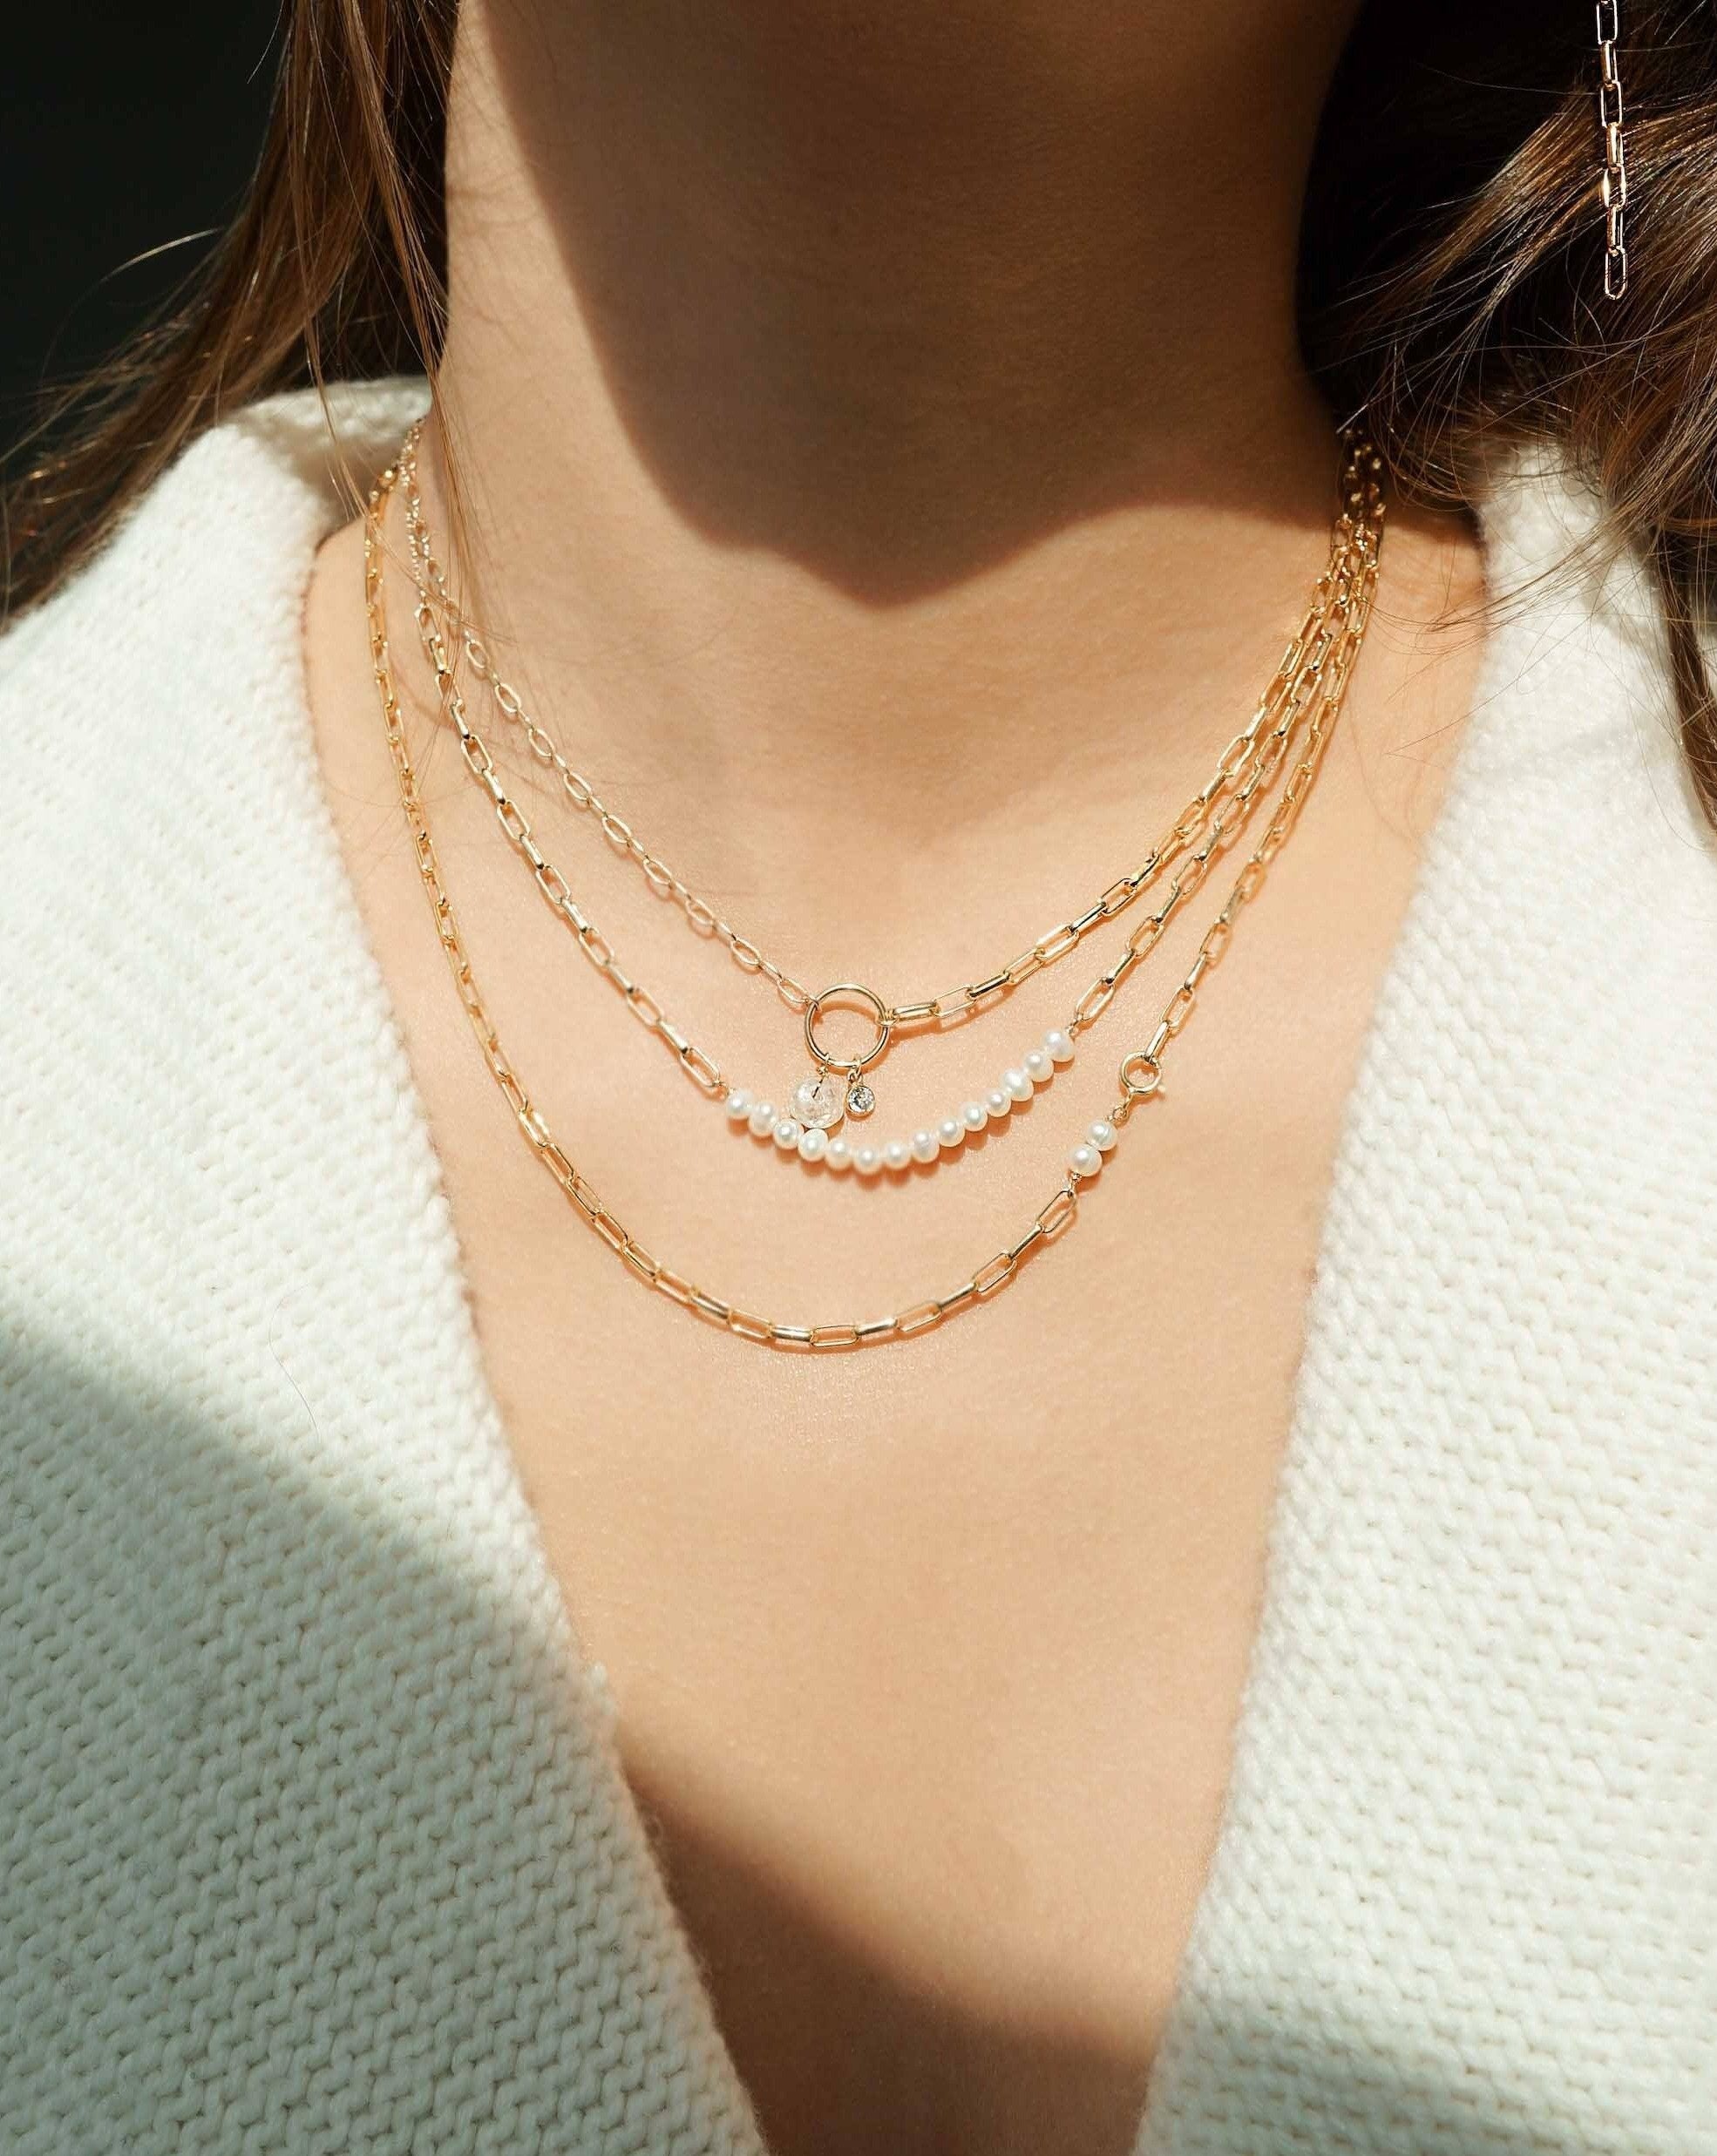 Harini Necklace by KOZAKH. A 18 inch long necklace in 14K Gold Filled, featuring 5mm white potato Pearls.